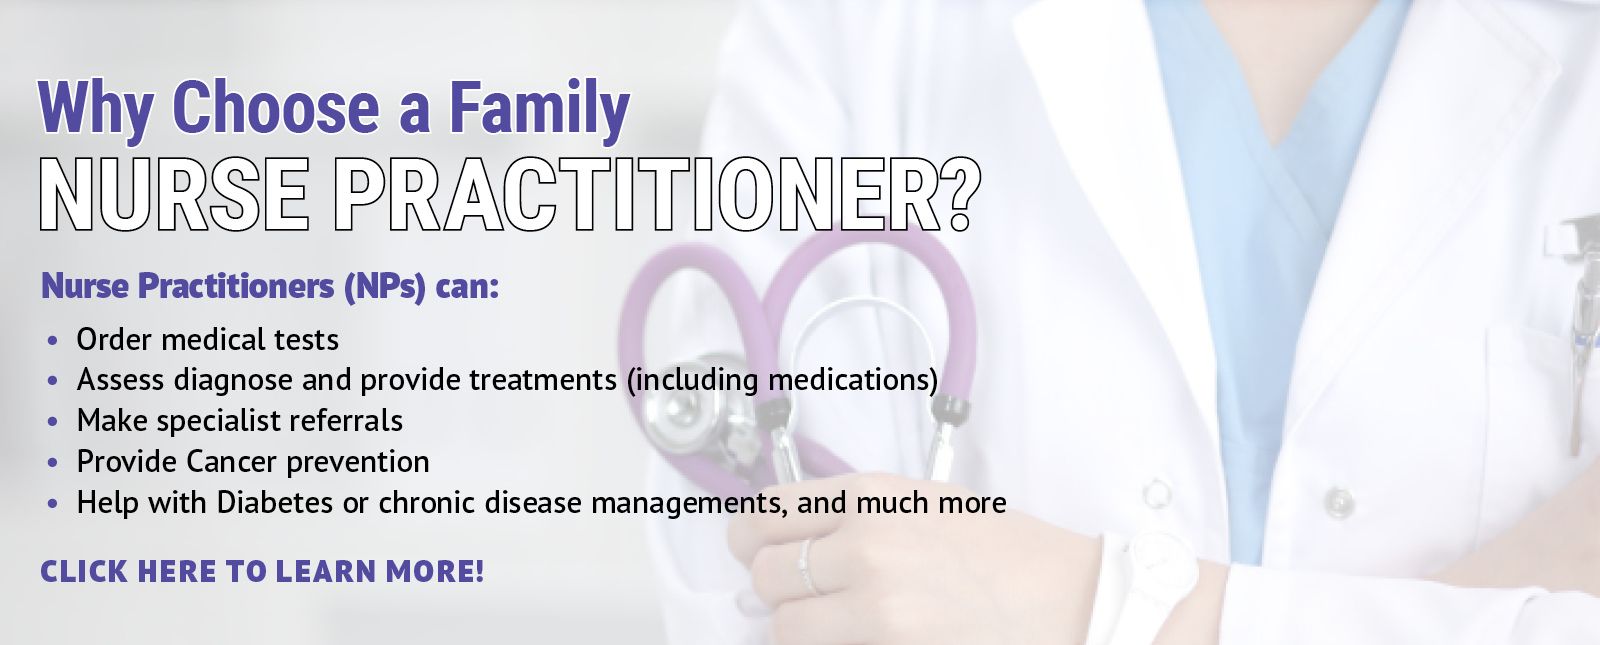 Nurse Practitioner Can Help With